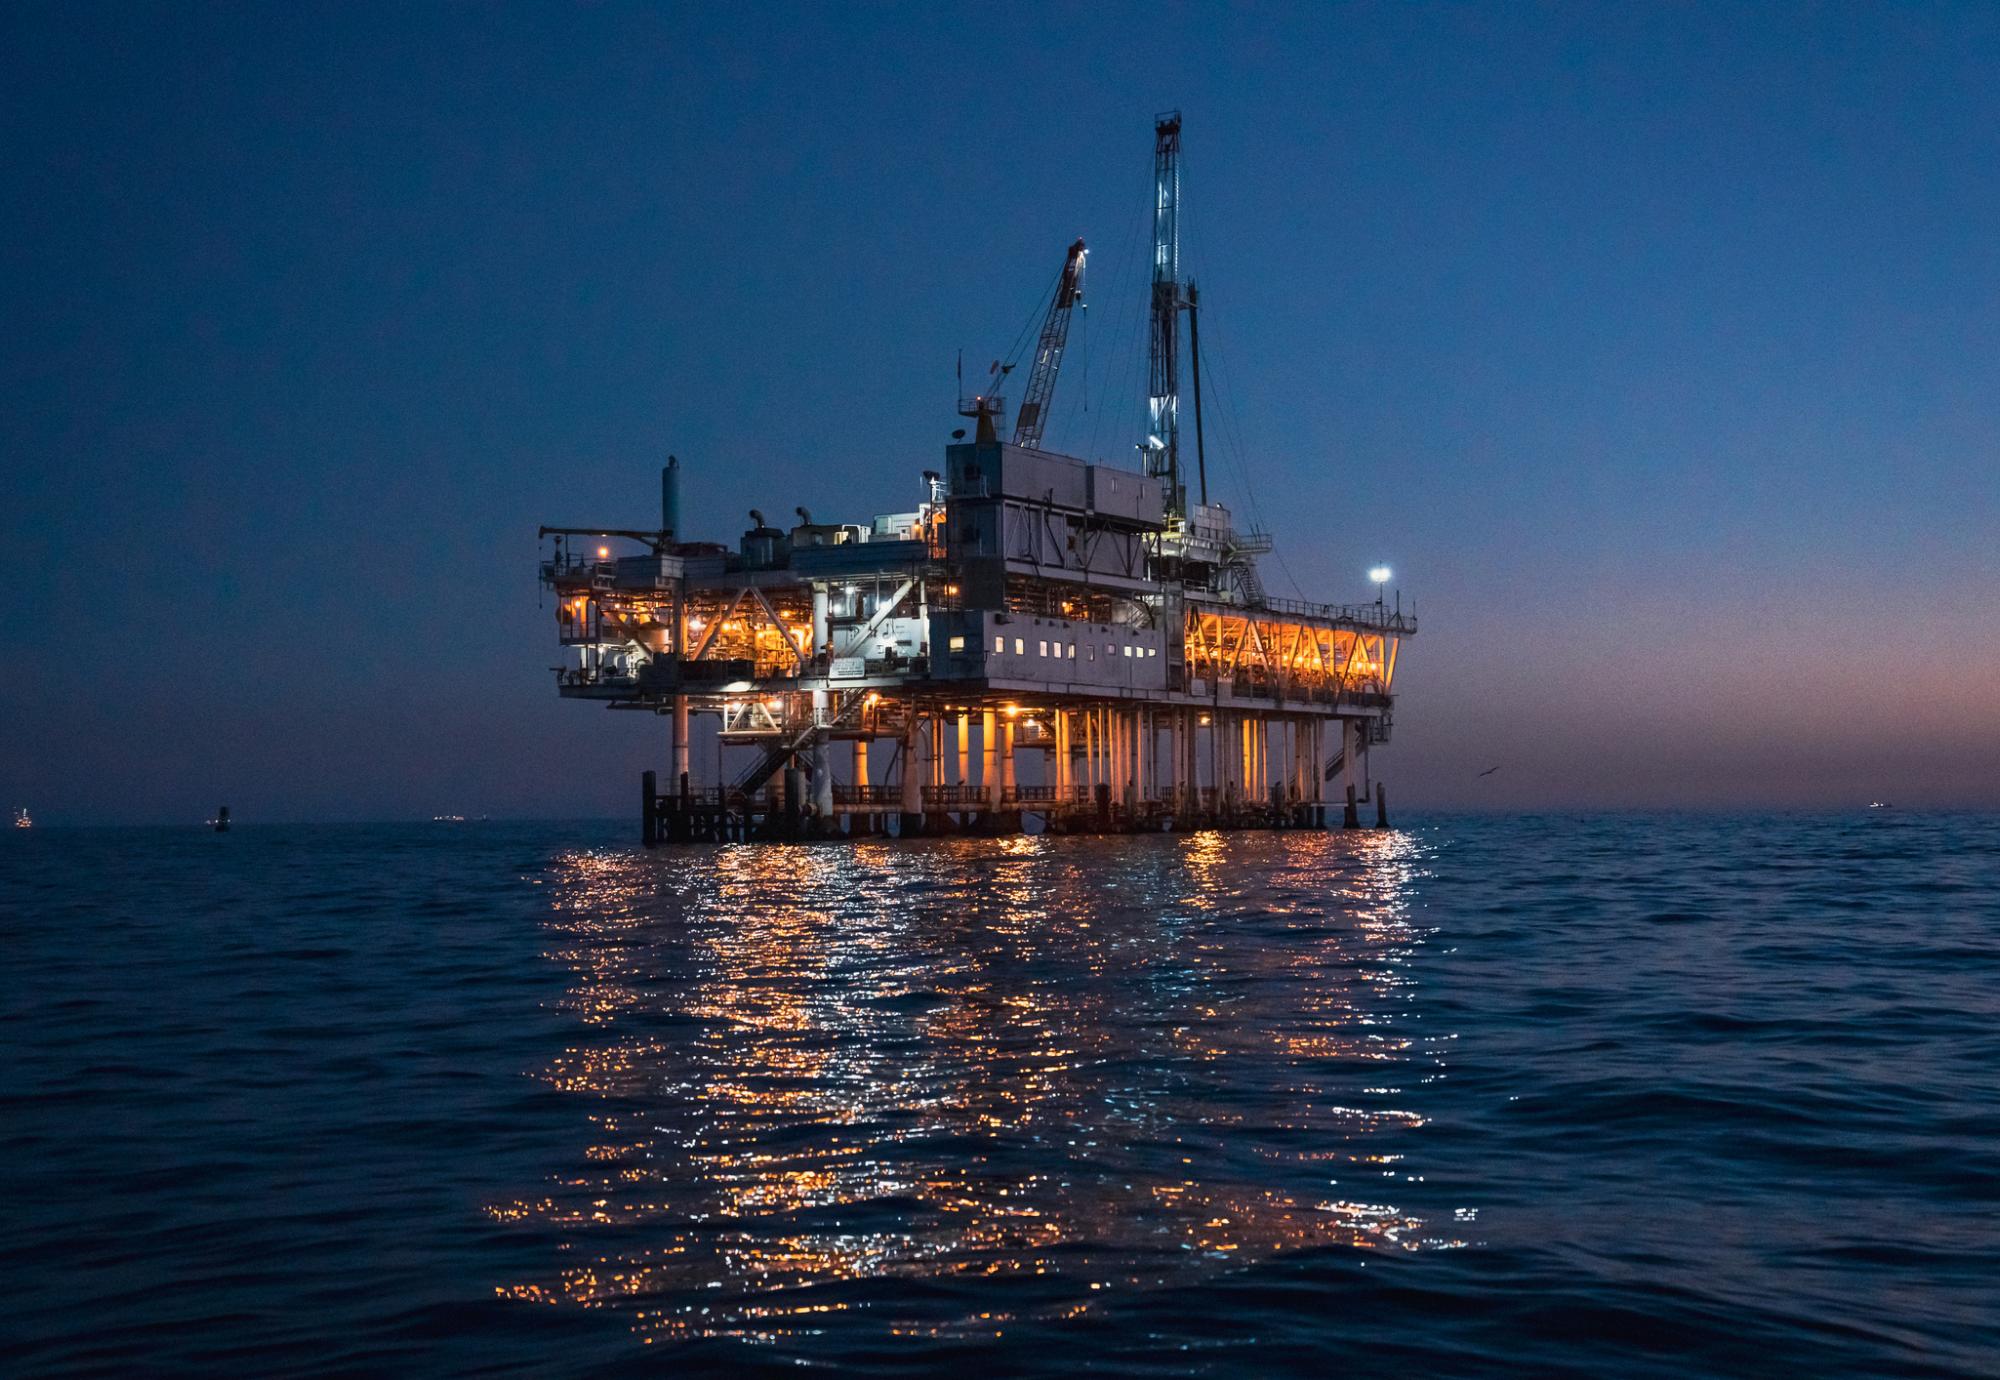 Night Time Offshore Oil Rig Drilling and Fracking Operation, Brightly Lit, on Calm Seas, Oil Platform